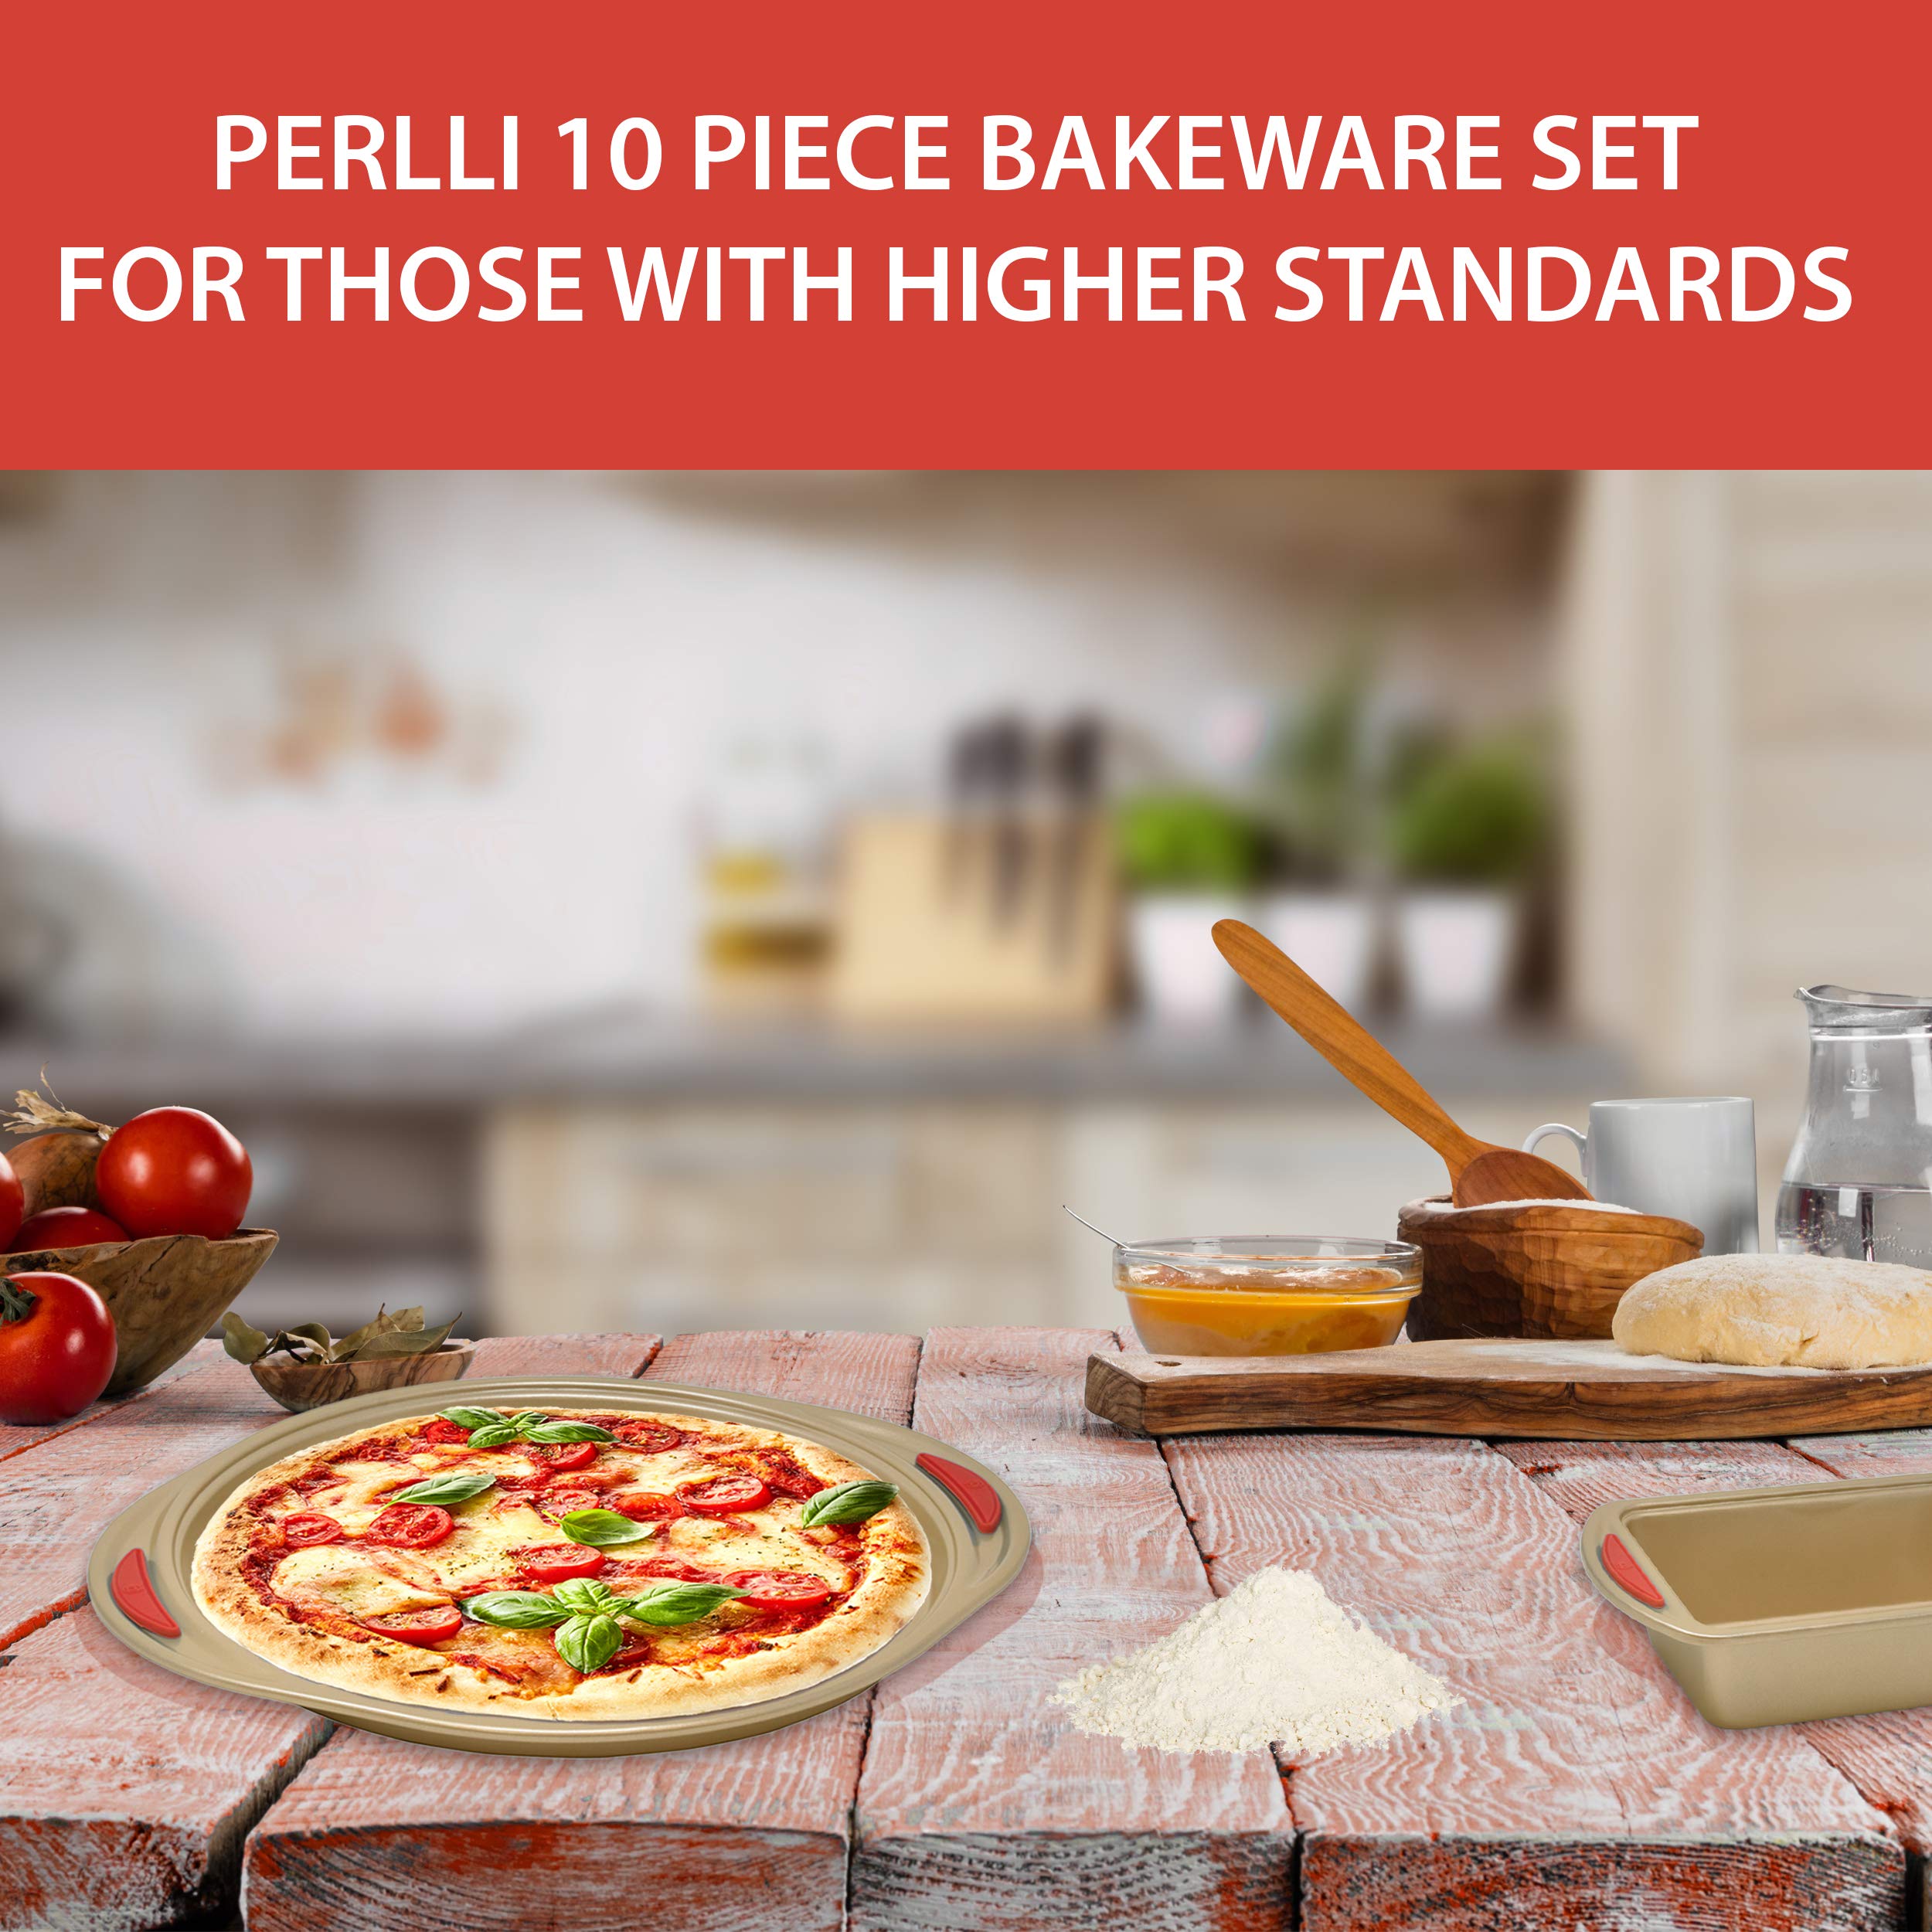 Baking Pan 10 Piece Set Nonstick Gold Steel Oven Bakeware Kitchen Set with Silicone Handles, Cookie Sheets, Round Cake Pans, 9x13 Pan with Lid, Loaf Pan, Deep Pan, Pizza Crisper, Muffin Pan by PERLLI